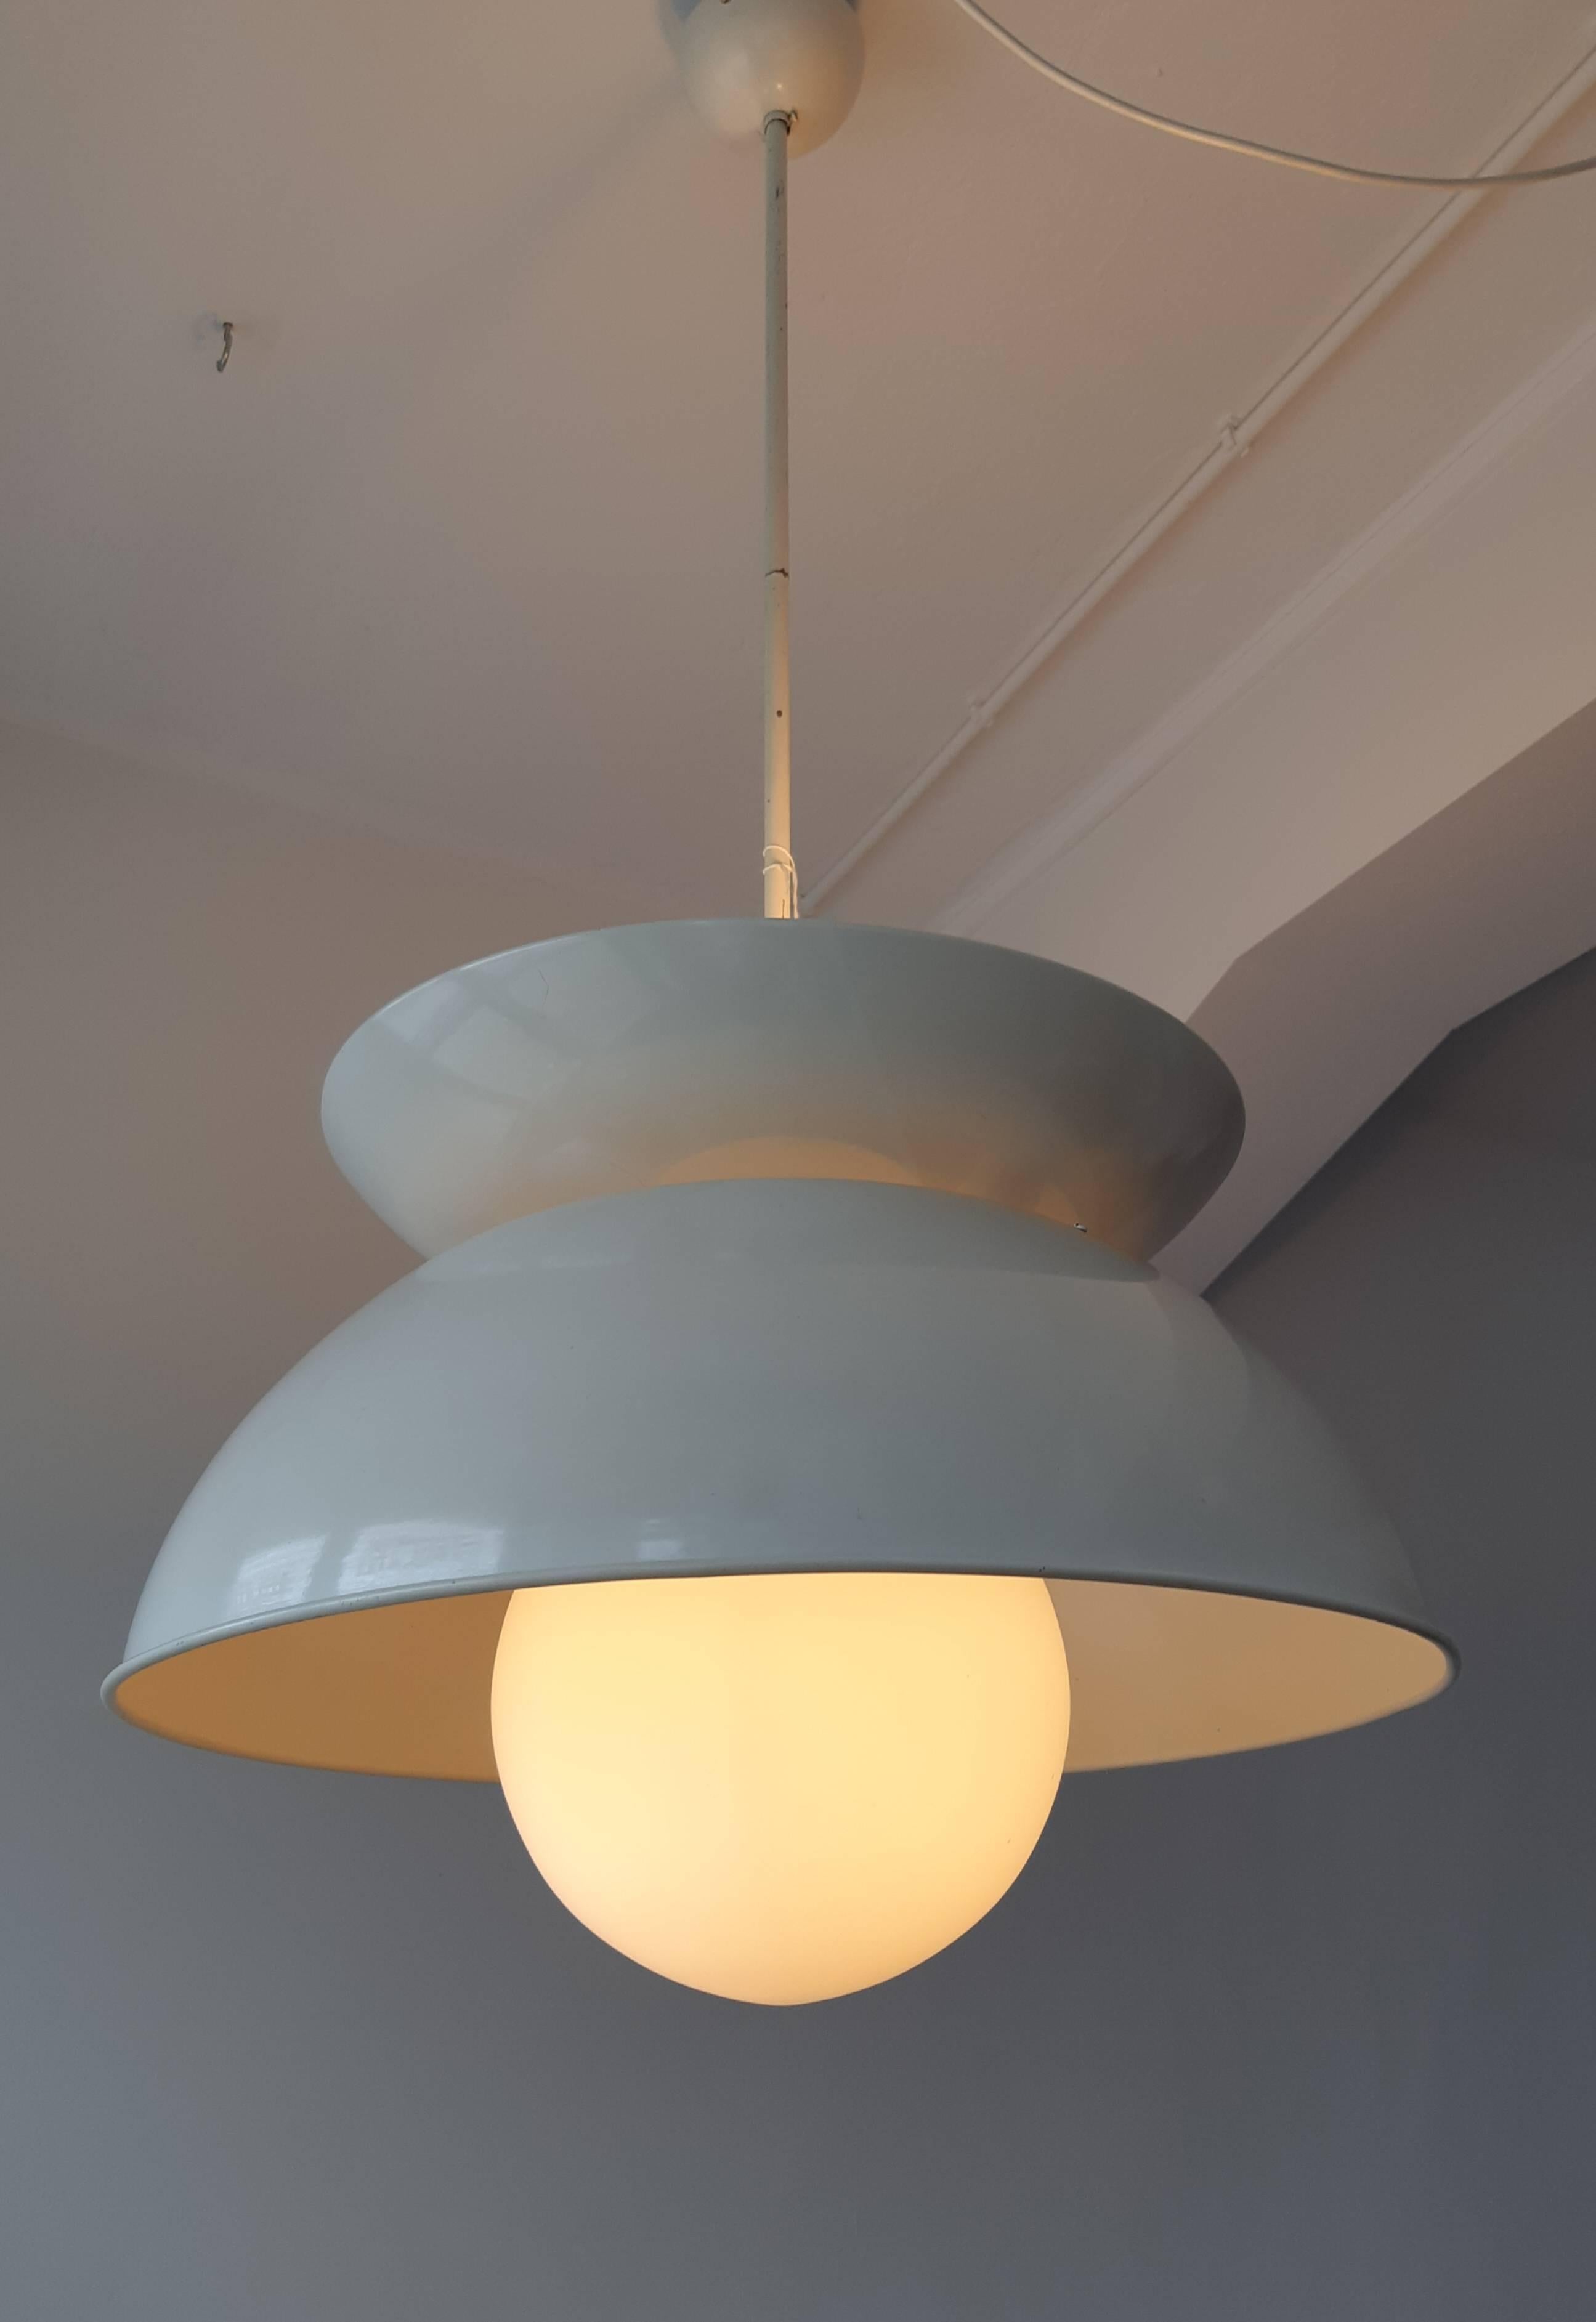 This midcentury Italian pendant lamp, model 'Cetra', is a design by Vico Magistretti for Artemide from the mid-1960s. The lamp, with a diameter of 56 cm, is made of white lacquered metal and has a matted opaline glass globe. It provides uplight and